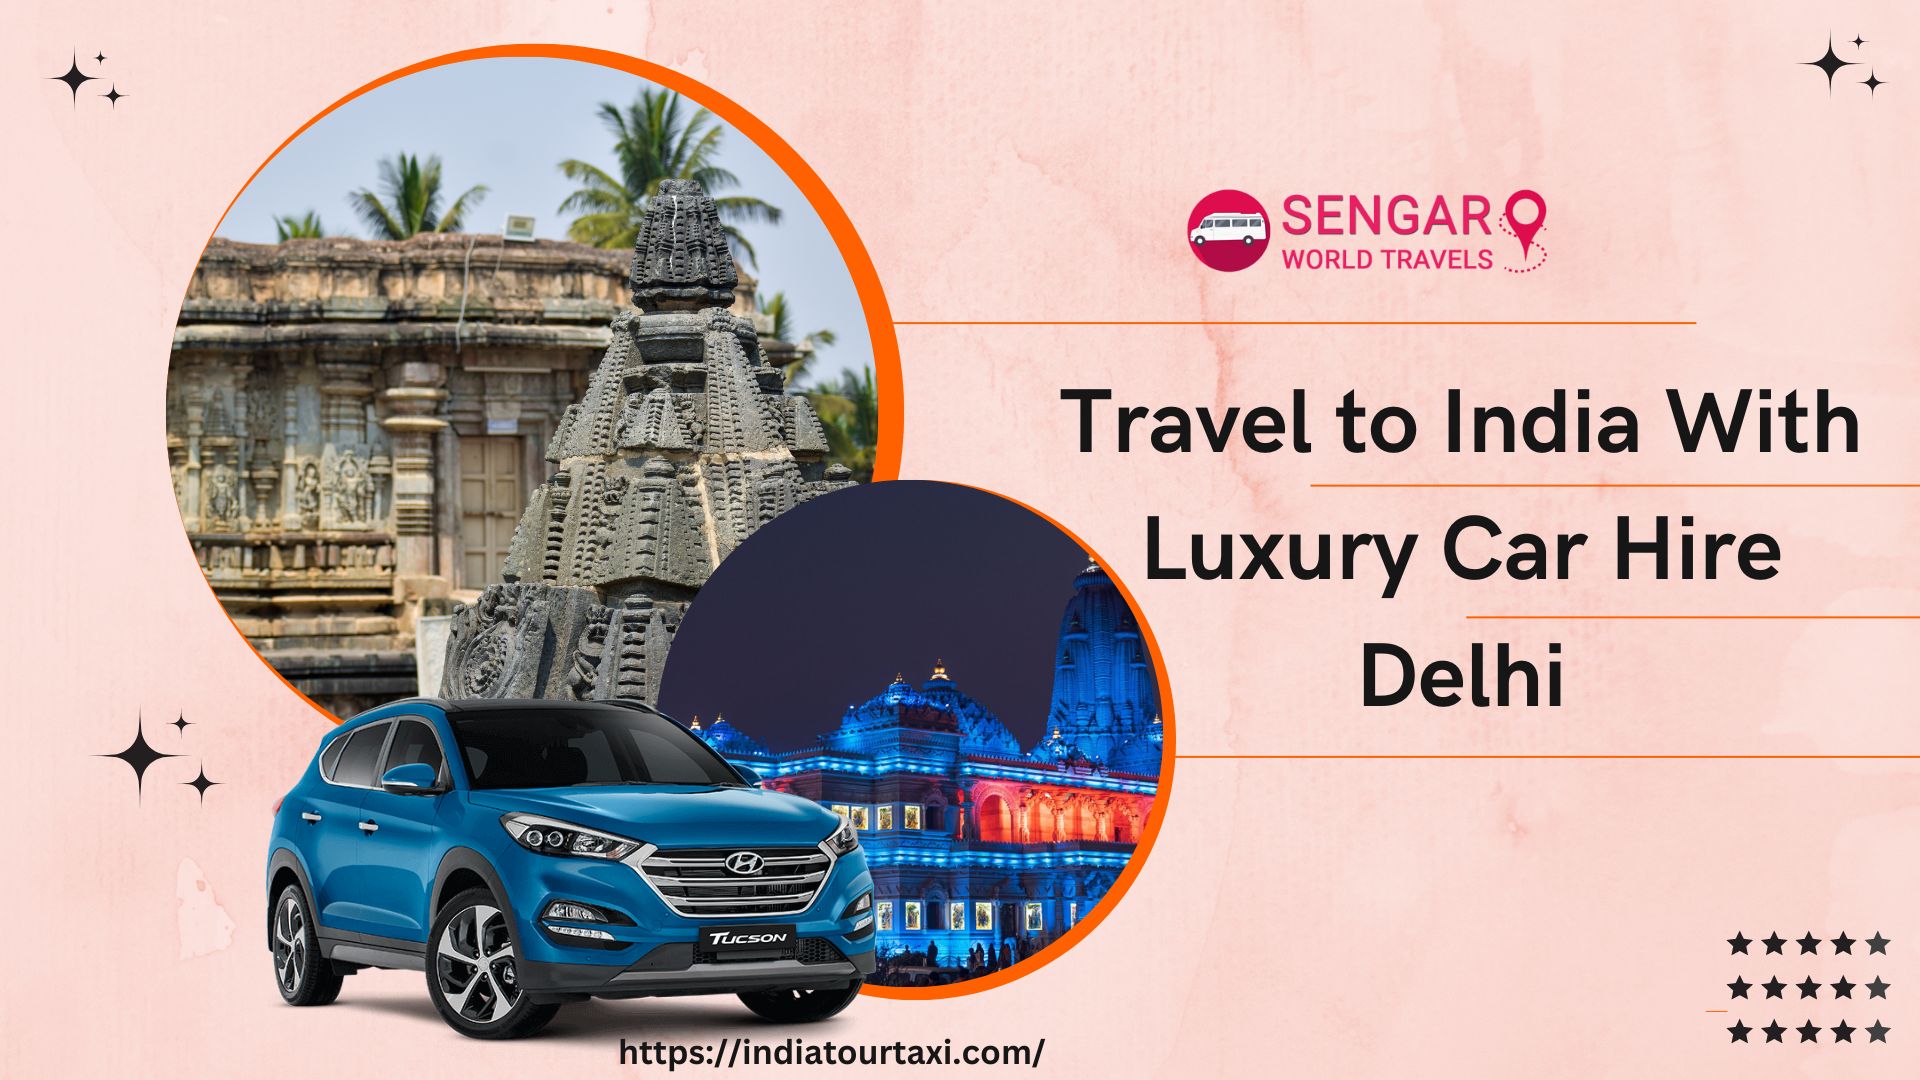 Travel to India With Luxury Car Hire Delhi-cc3bc891